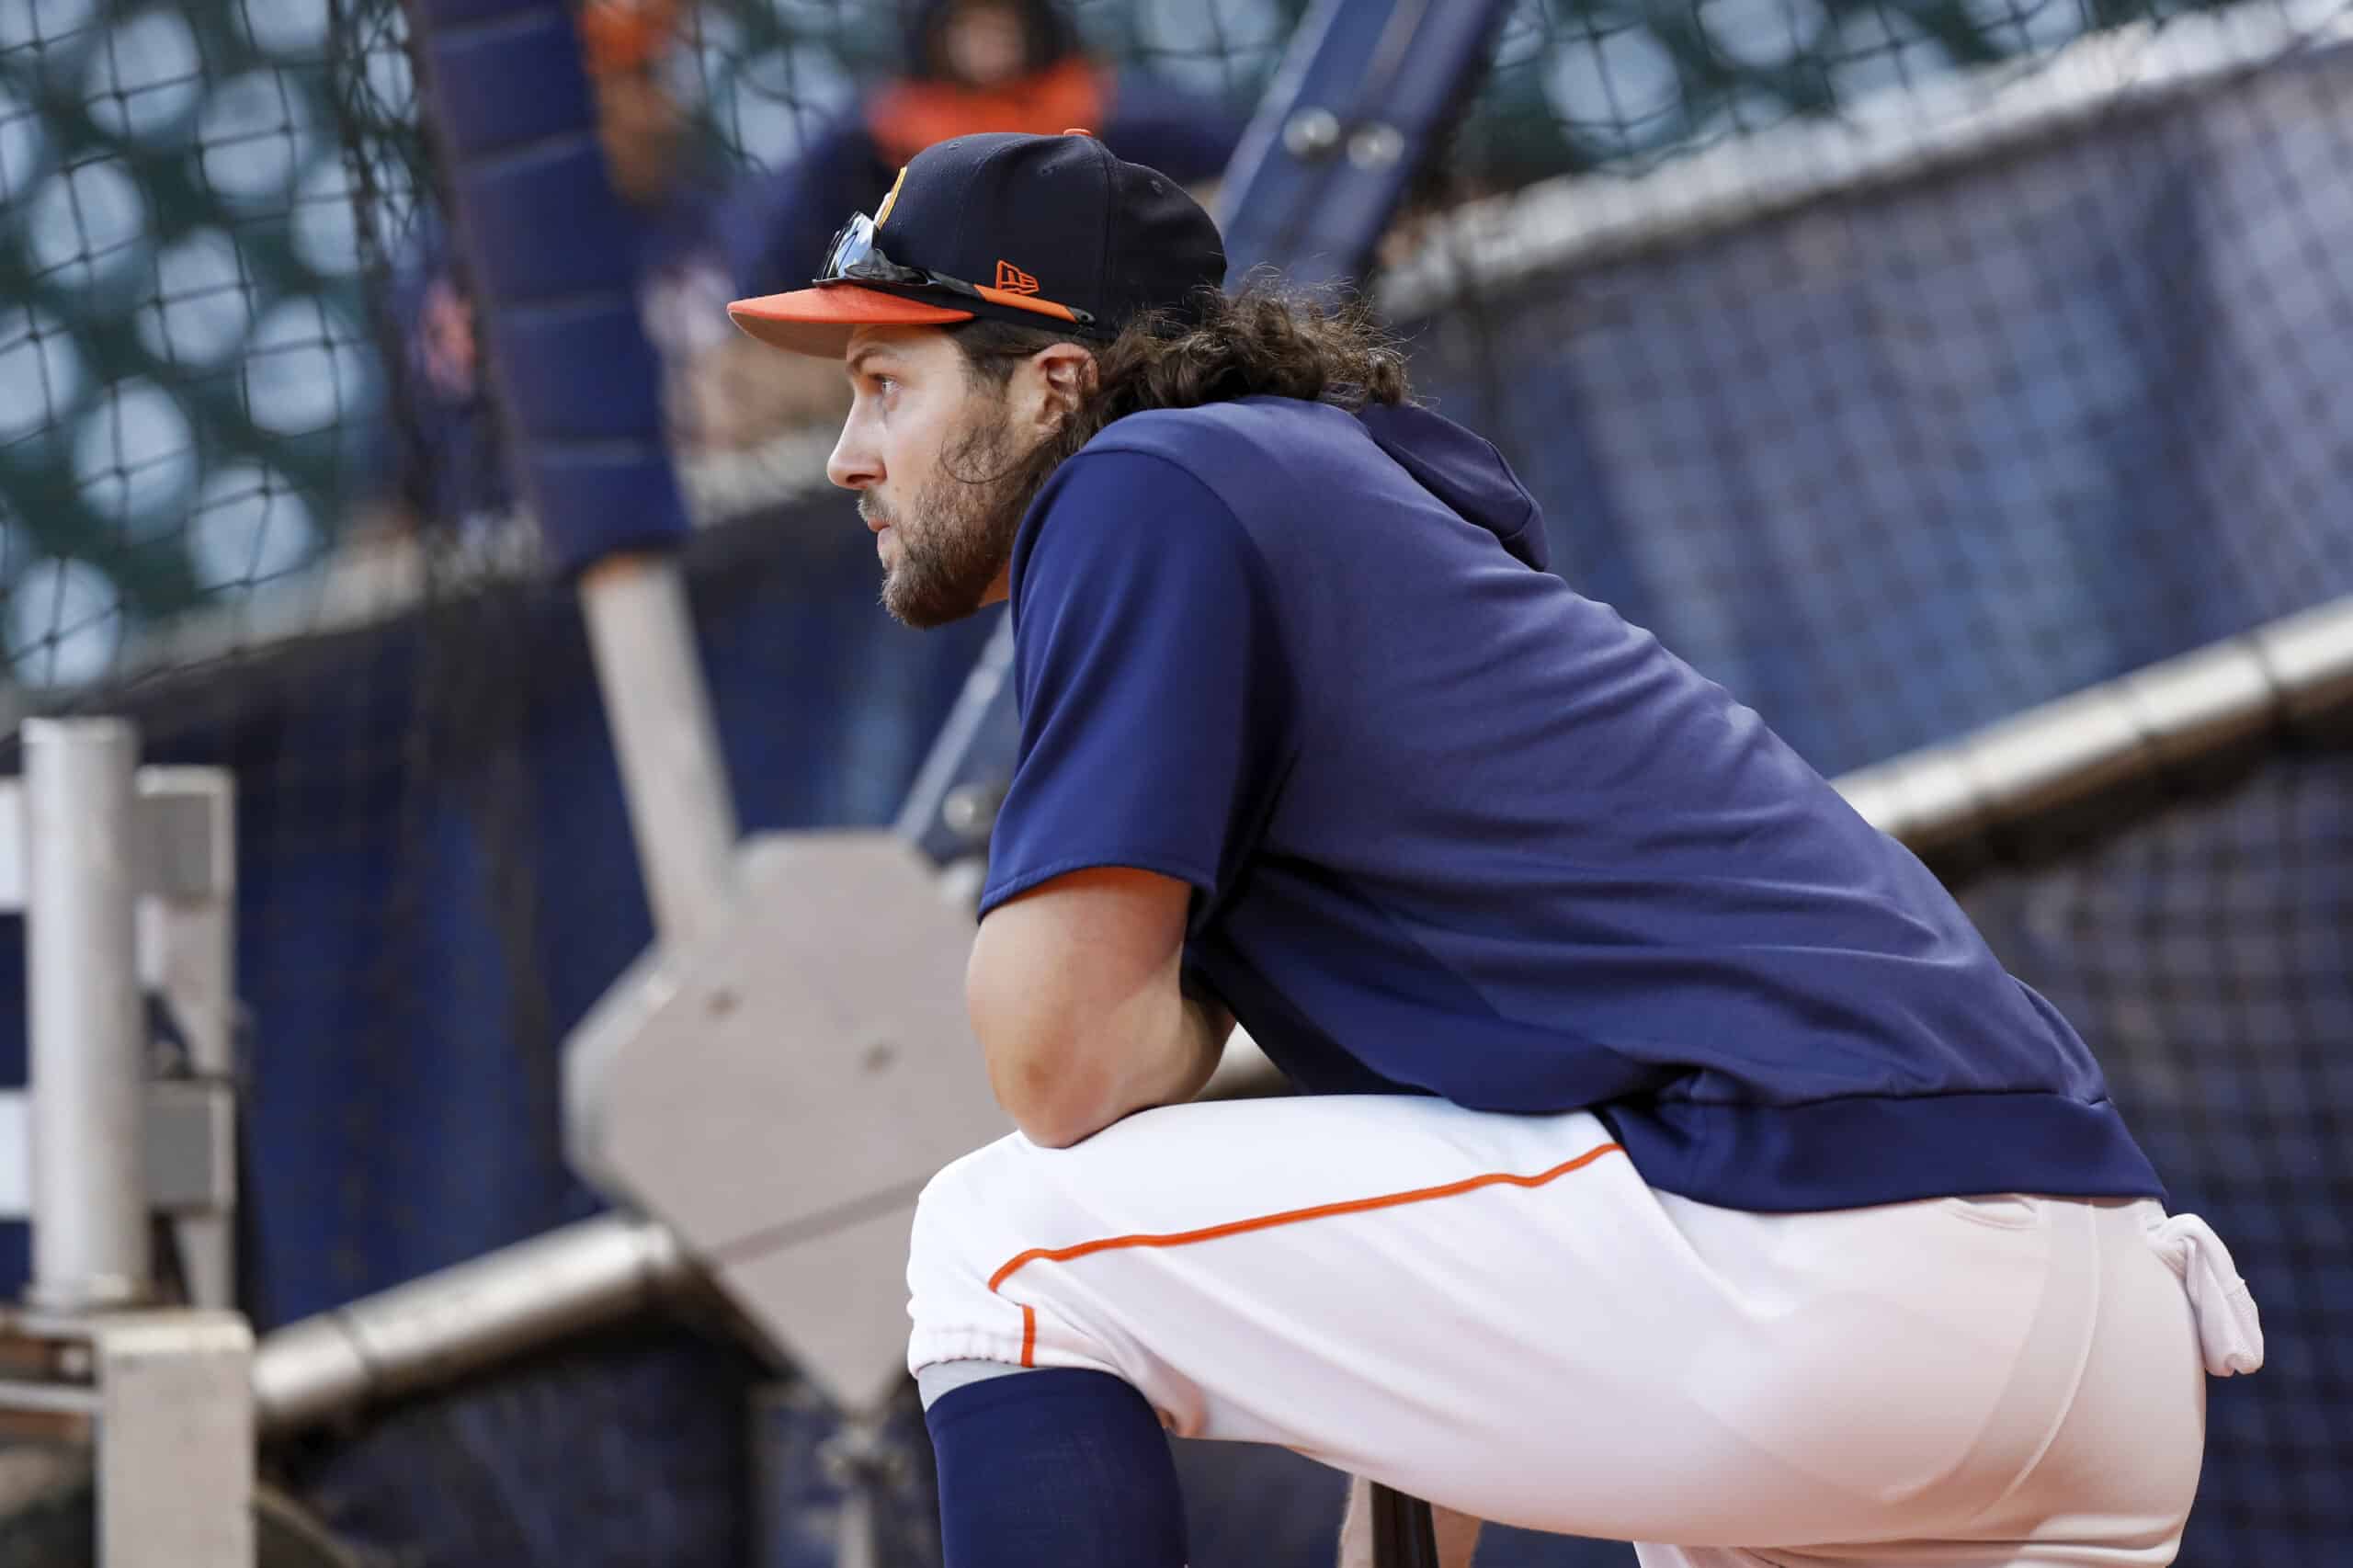 Source: White Sox Sign Former Astros Outfielder Marisnick - Astros Future